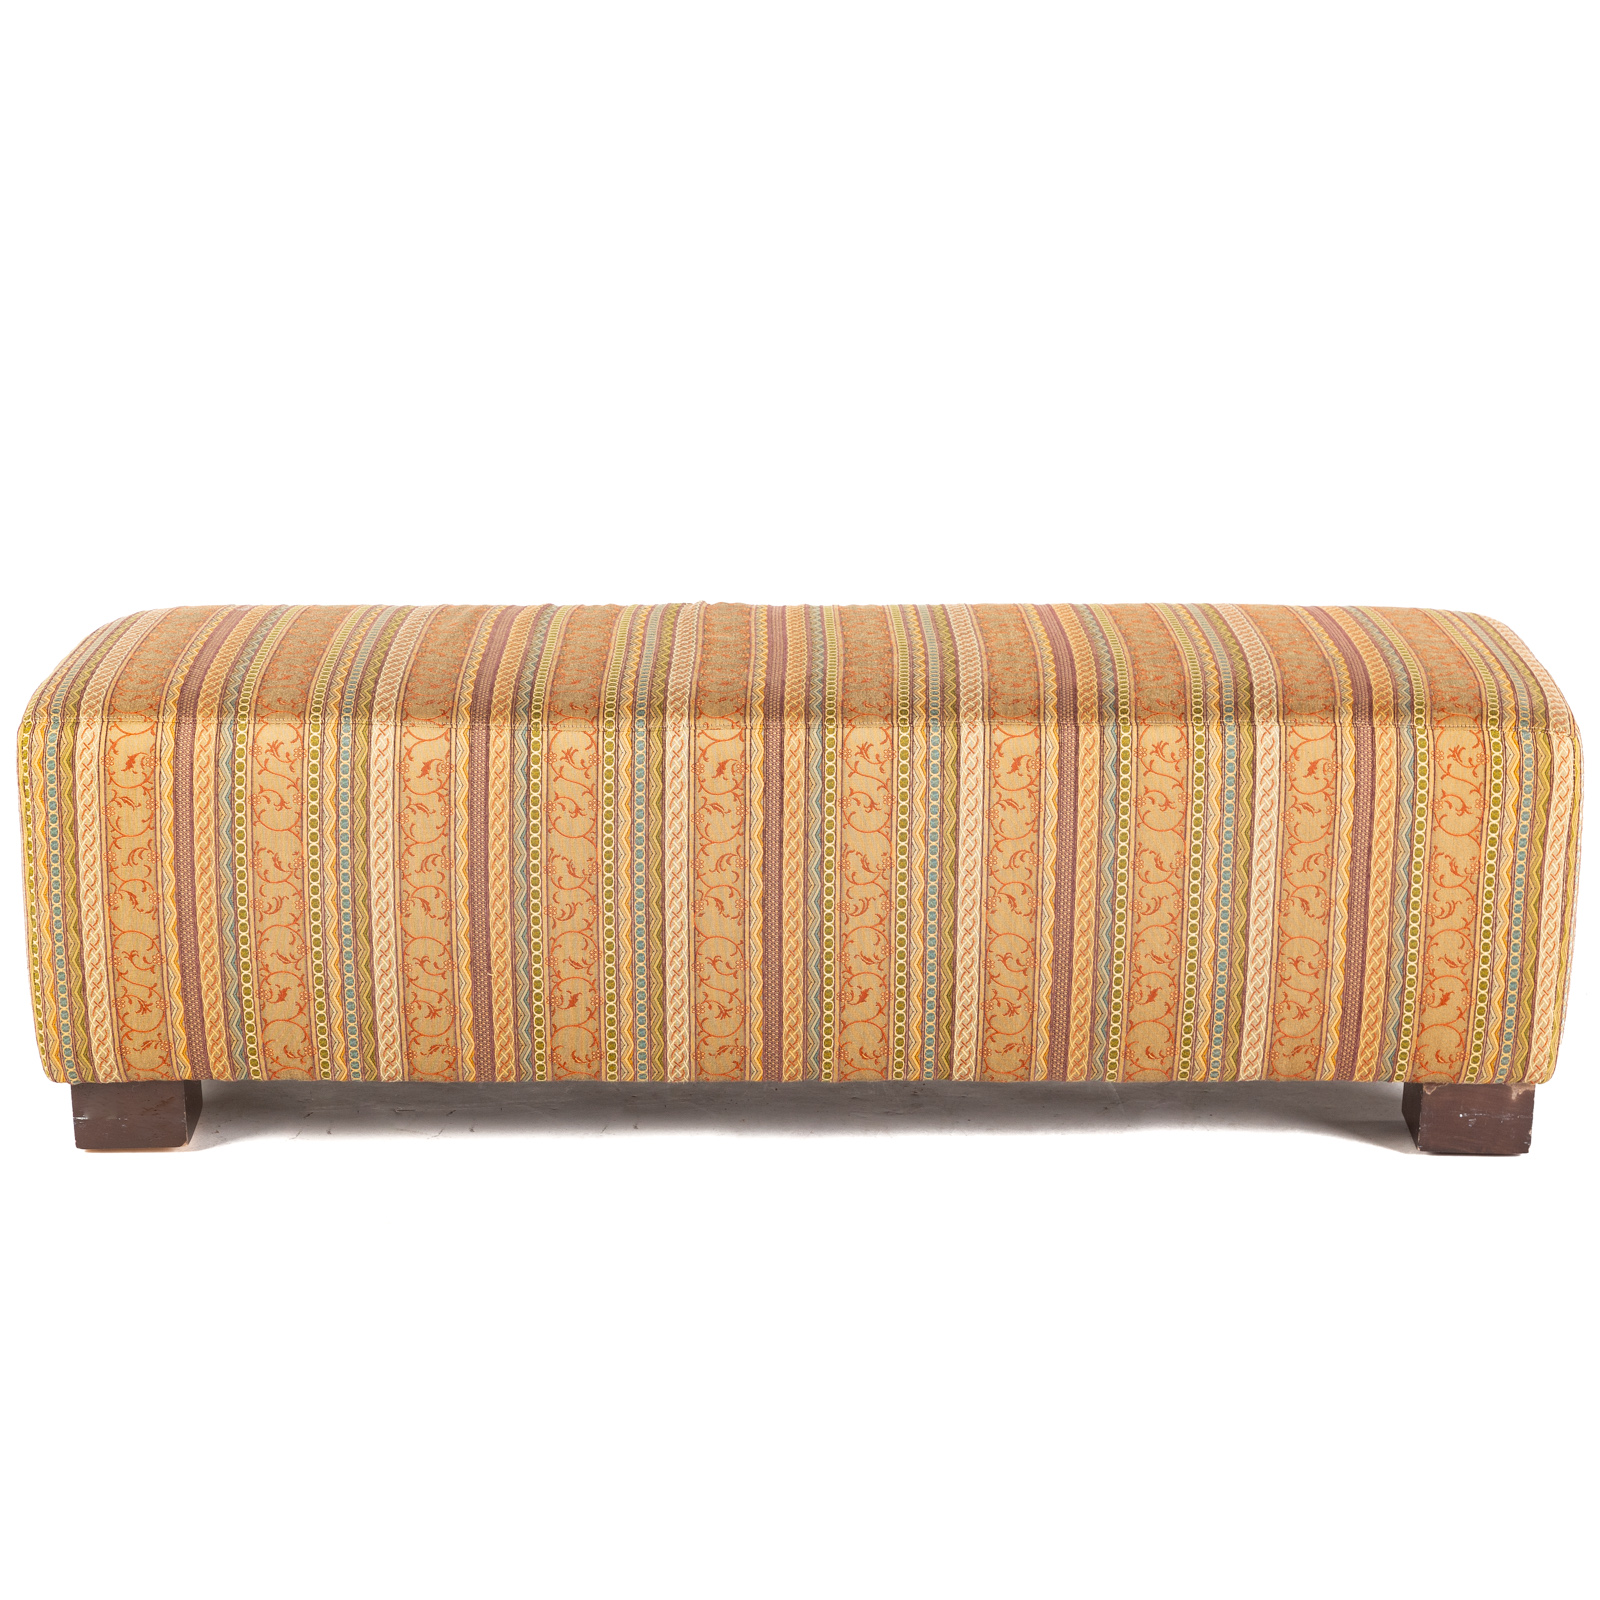 CONTEMPORARY UPHOLSTERED OTTOMAN BENCH 2eae7d